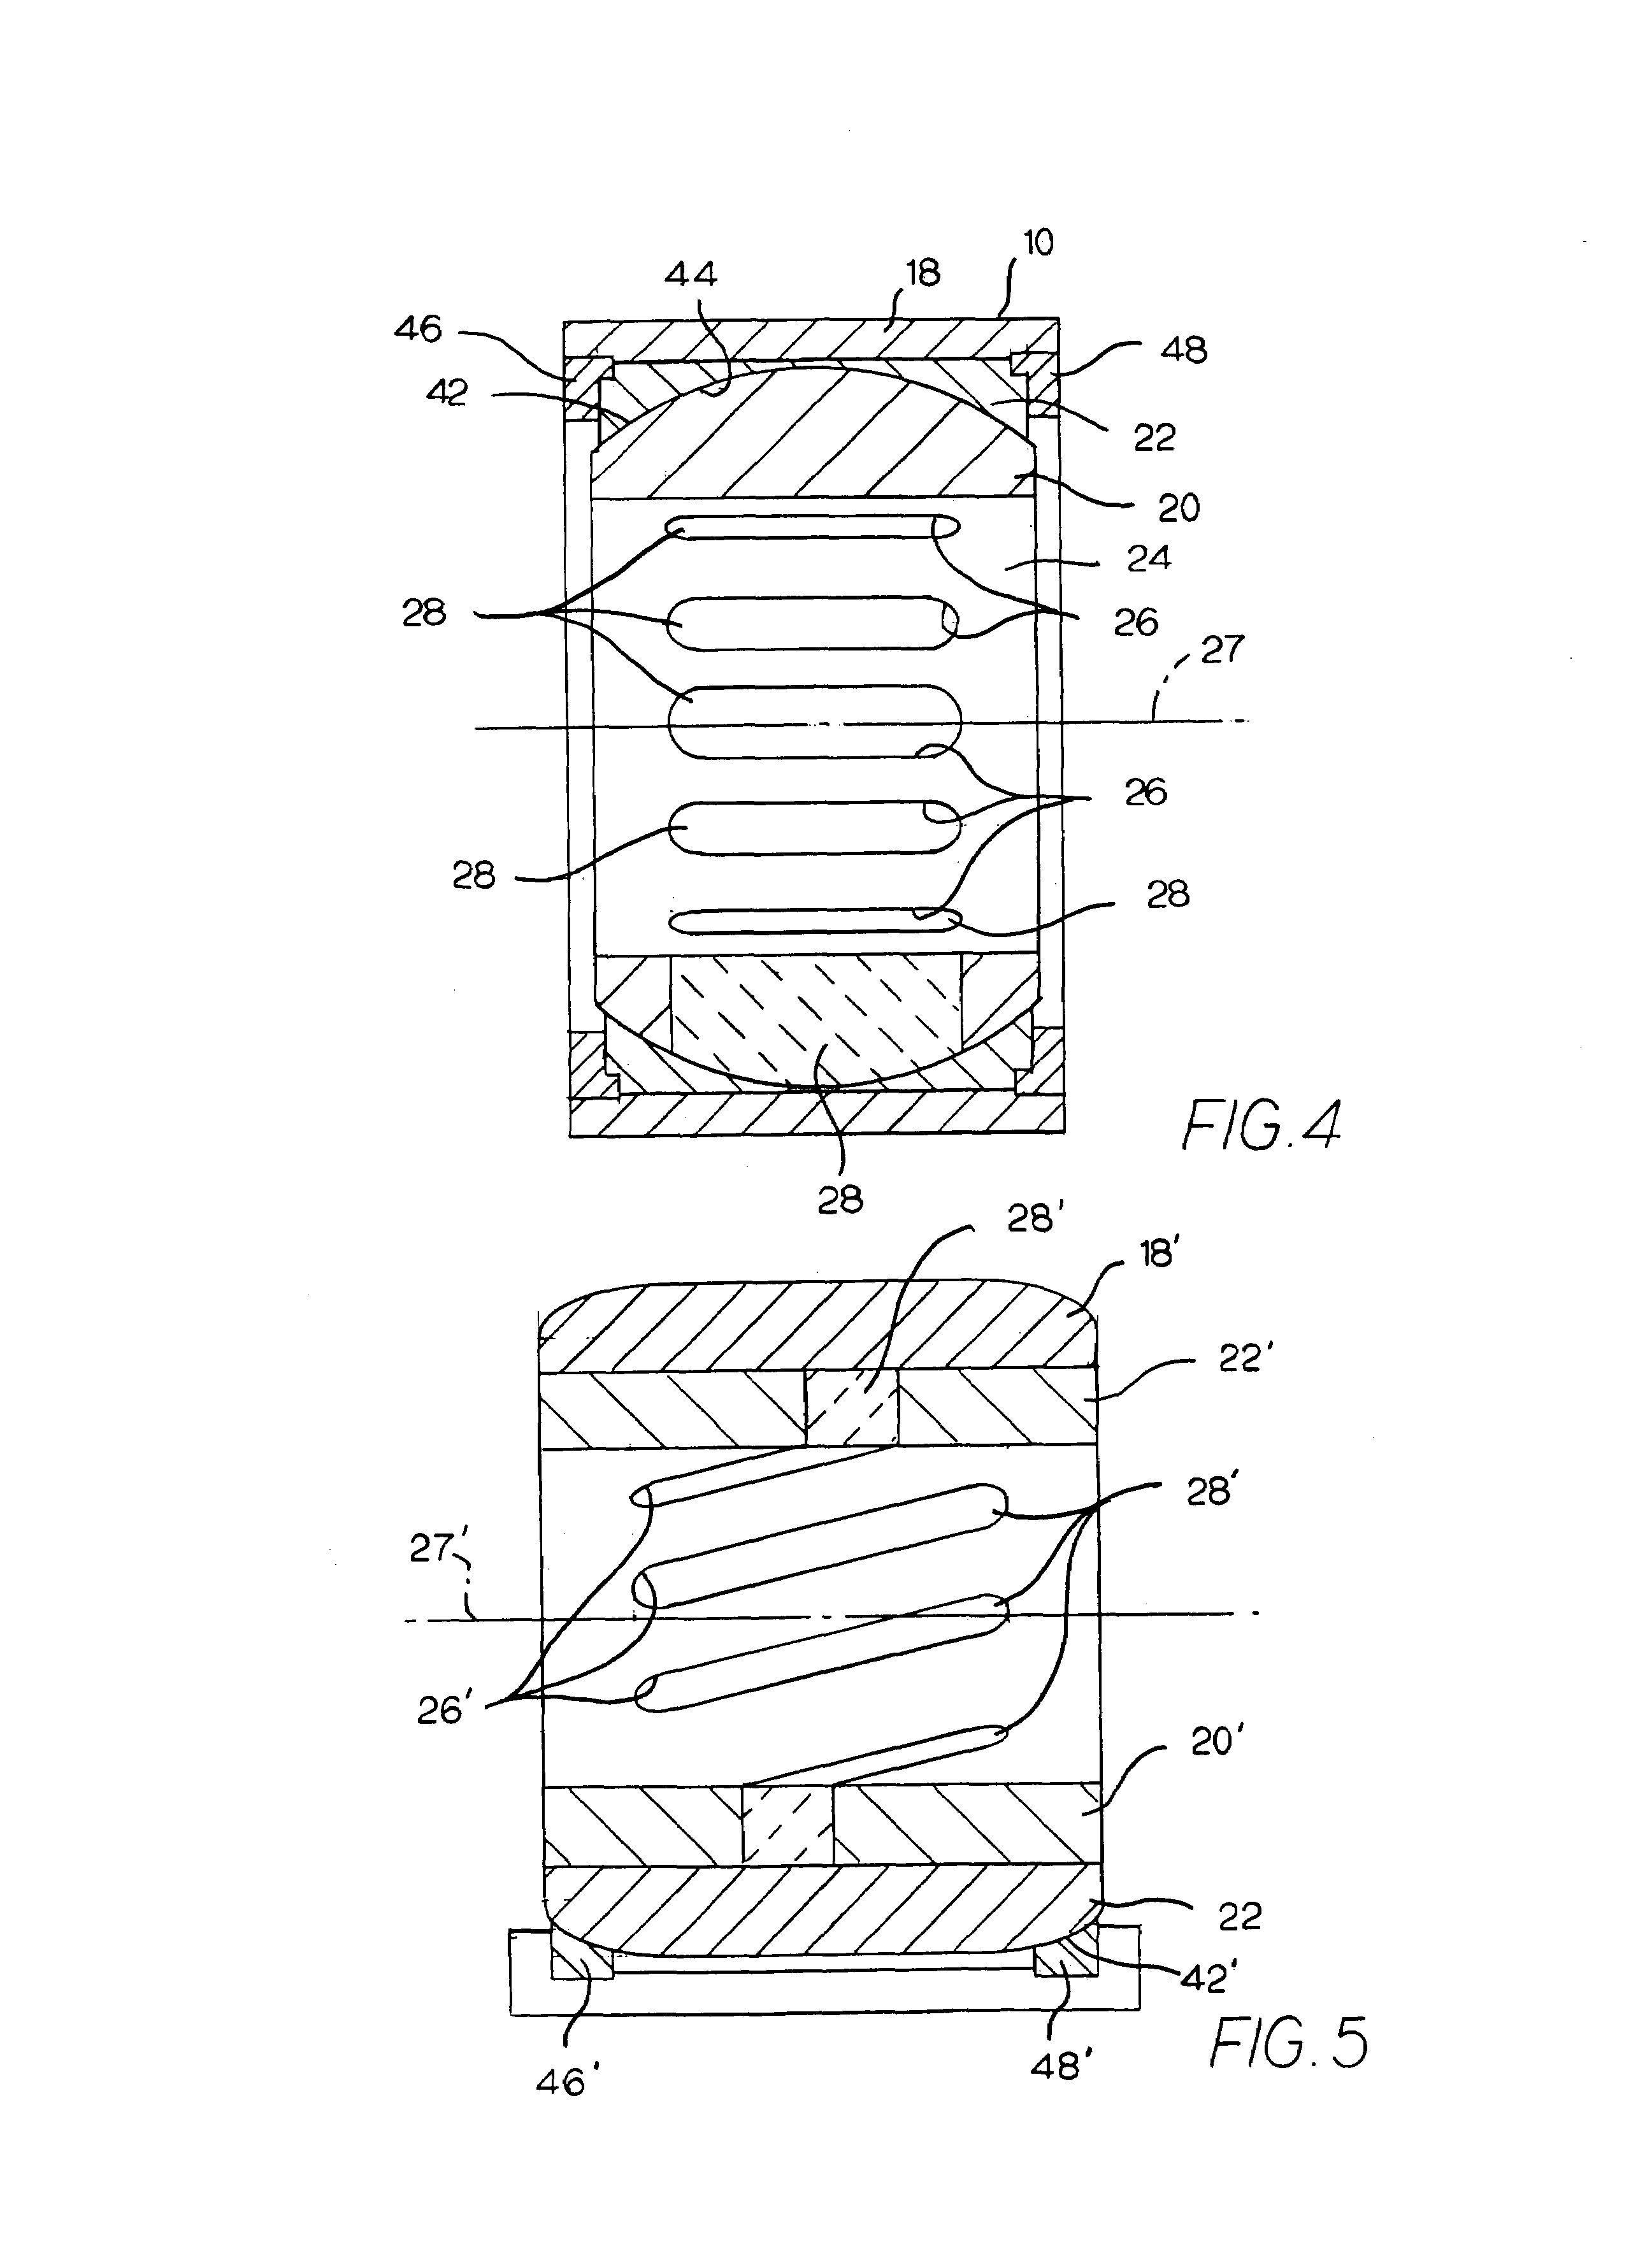 Sink roll bearing having ceramic elements for supporting the roll's shaft